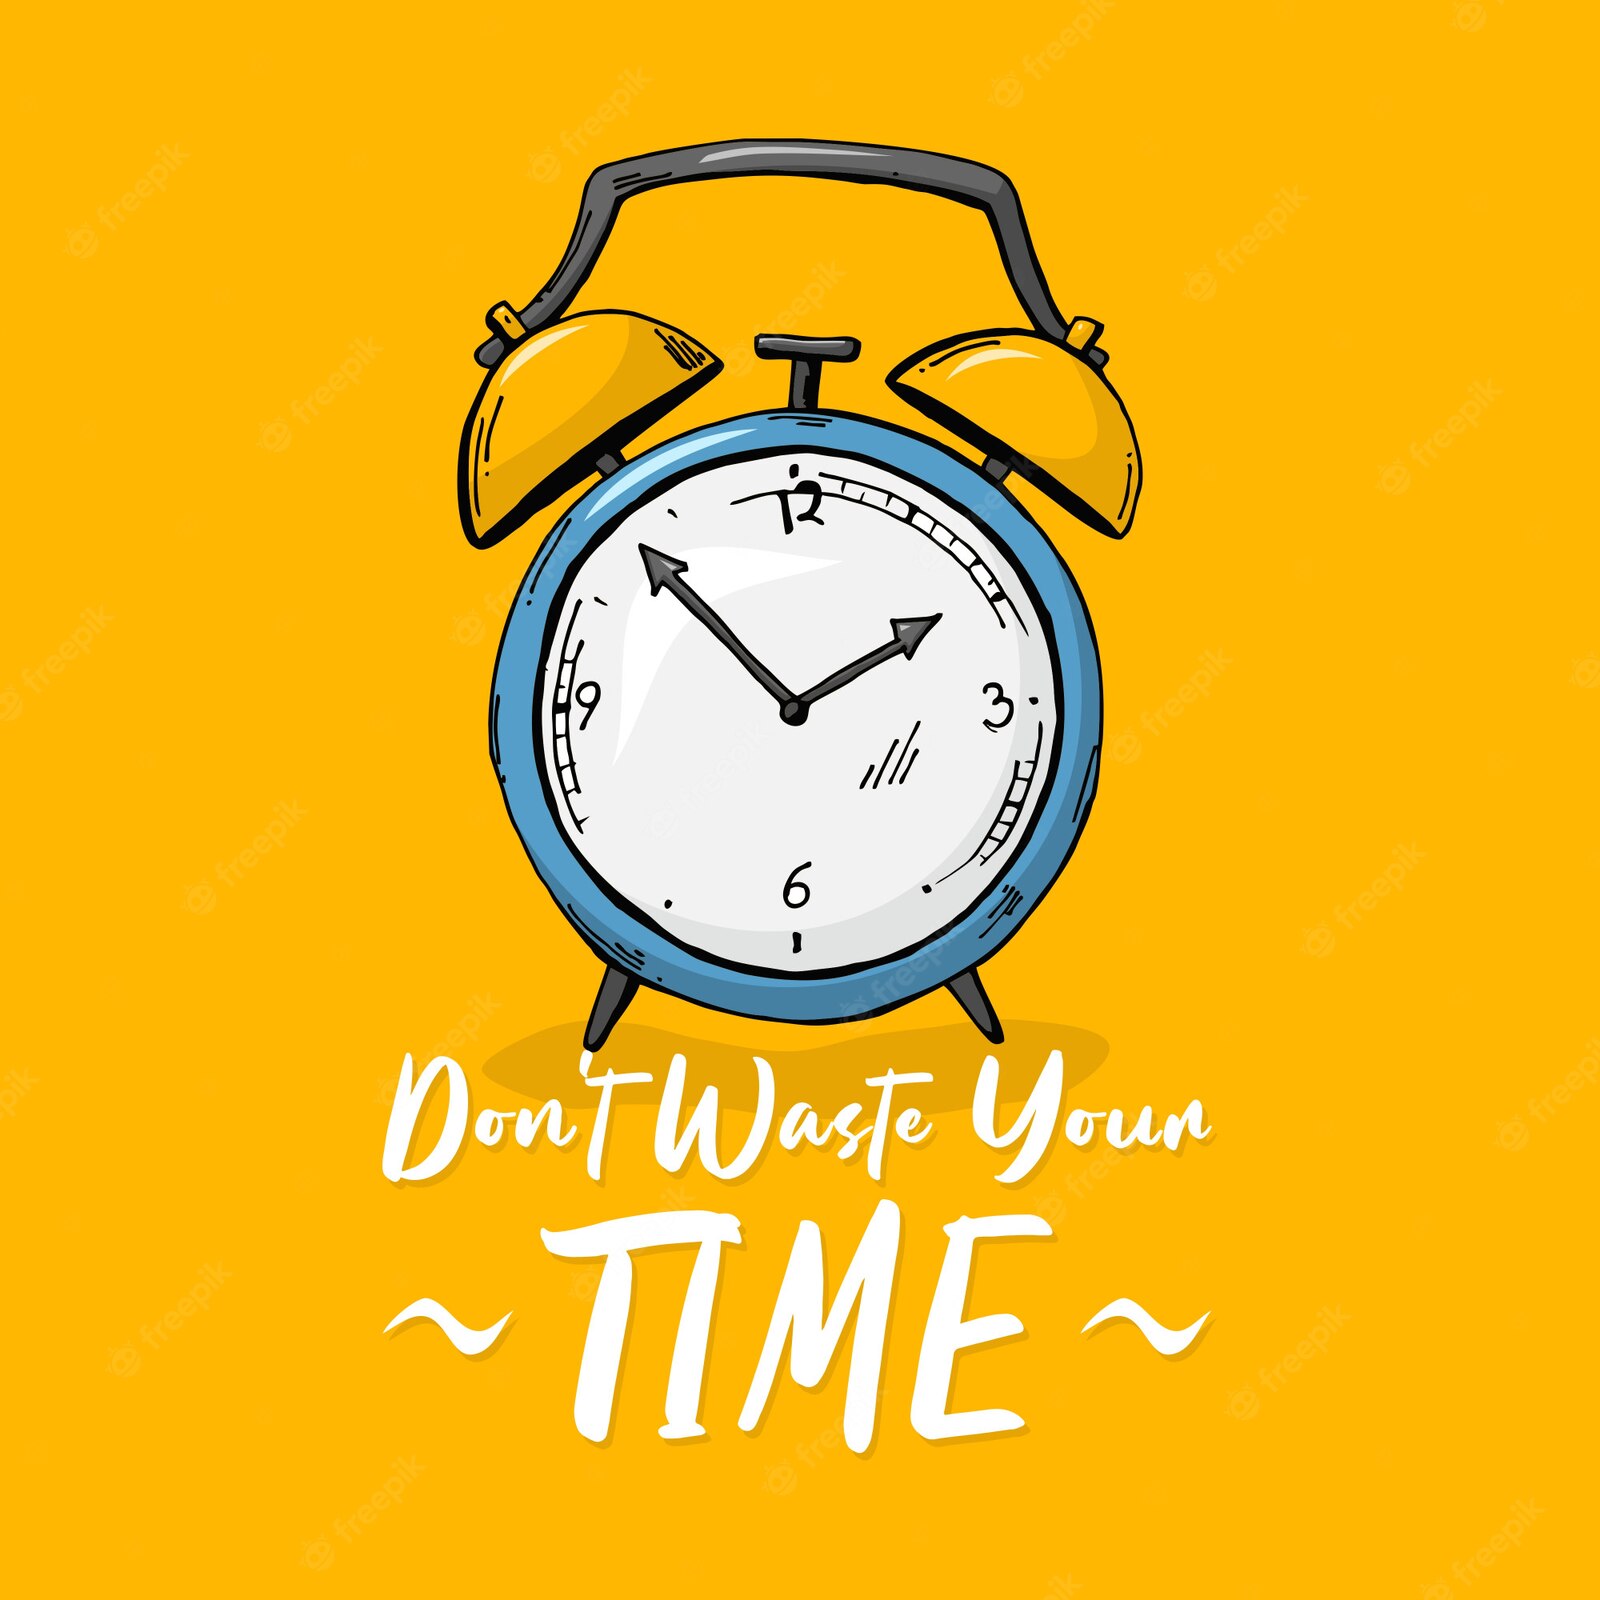 Download Dont waste your time quote - Motivational quotes for your mobile  cell phone